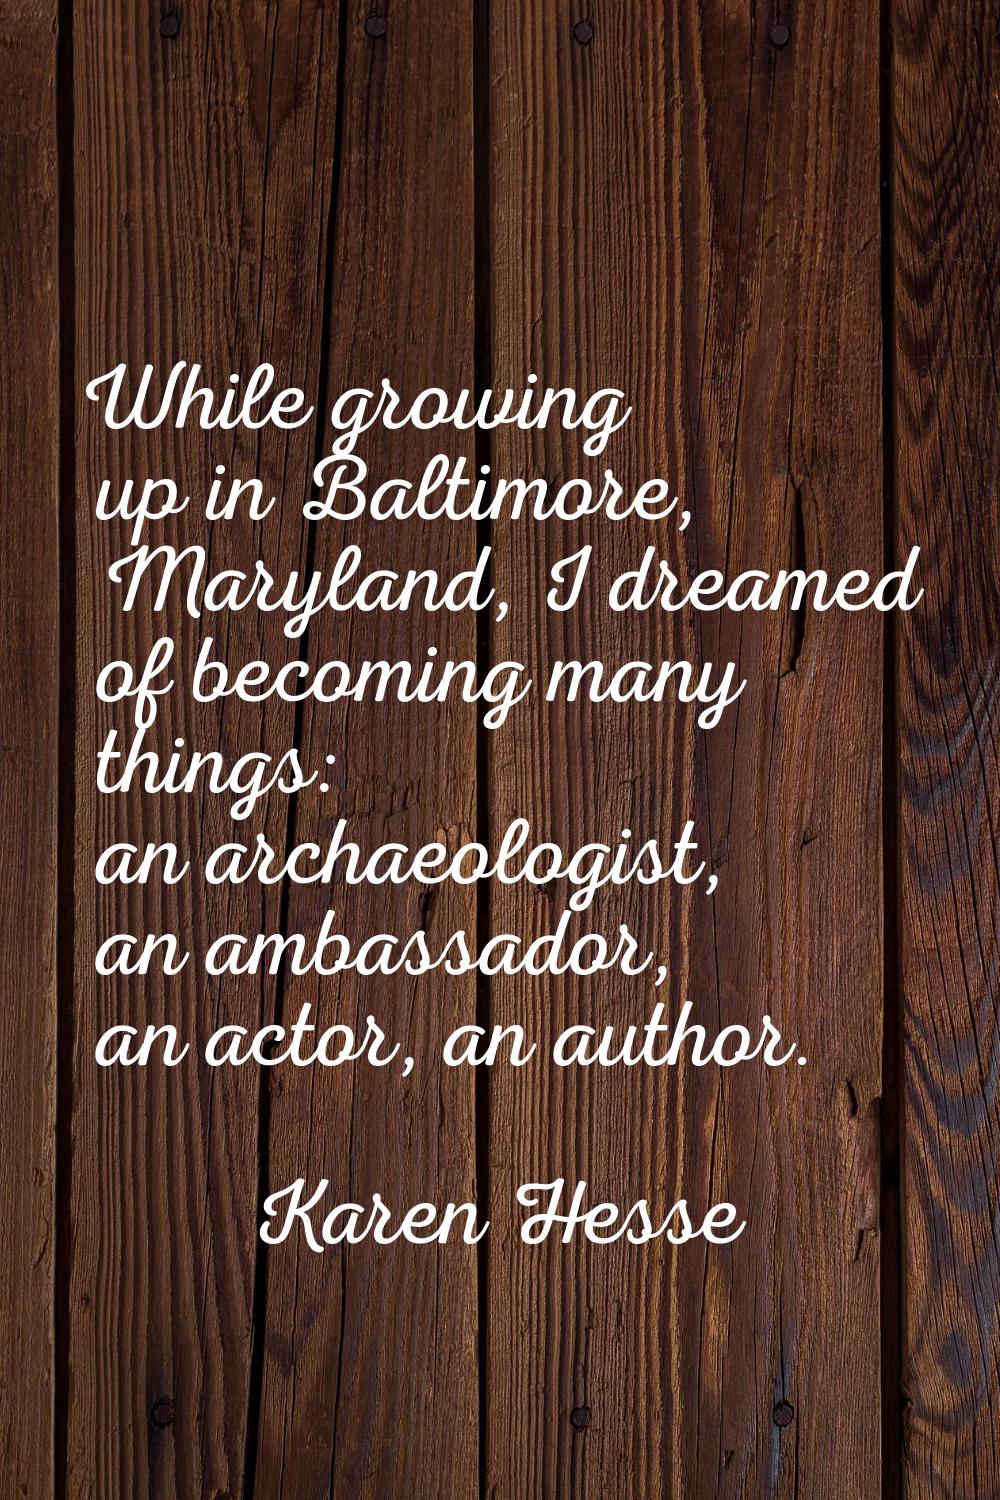 While growing up in Baltimore, Maryland, I dreamed of becoming many things: an archaeologist, an am